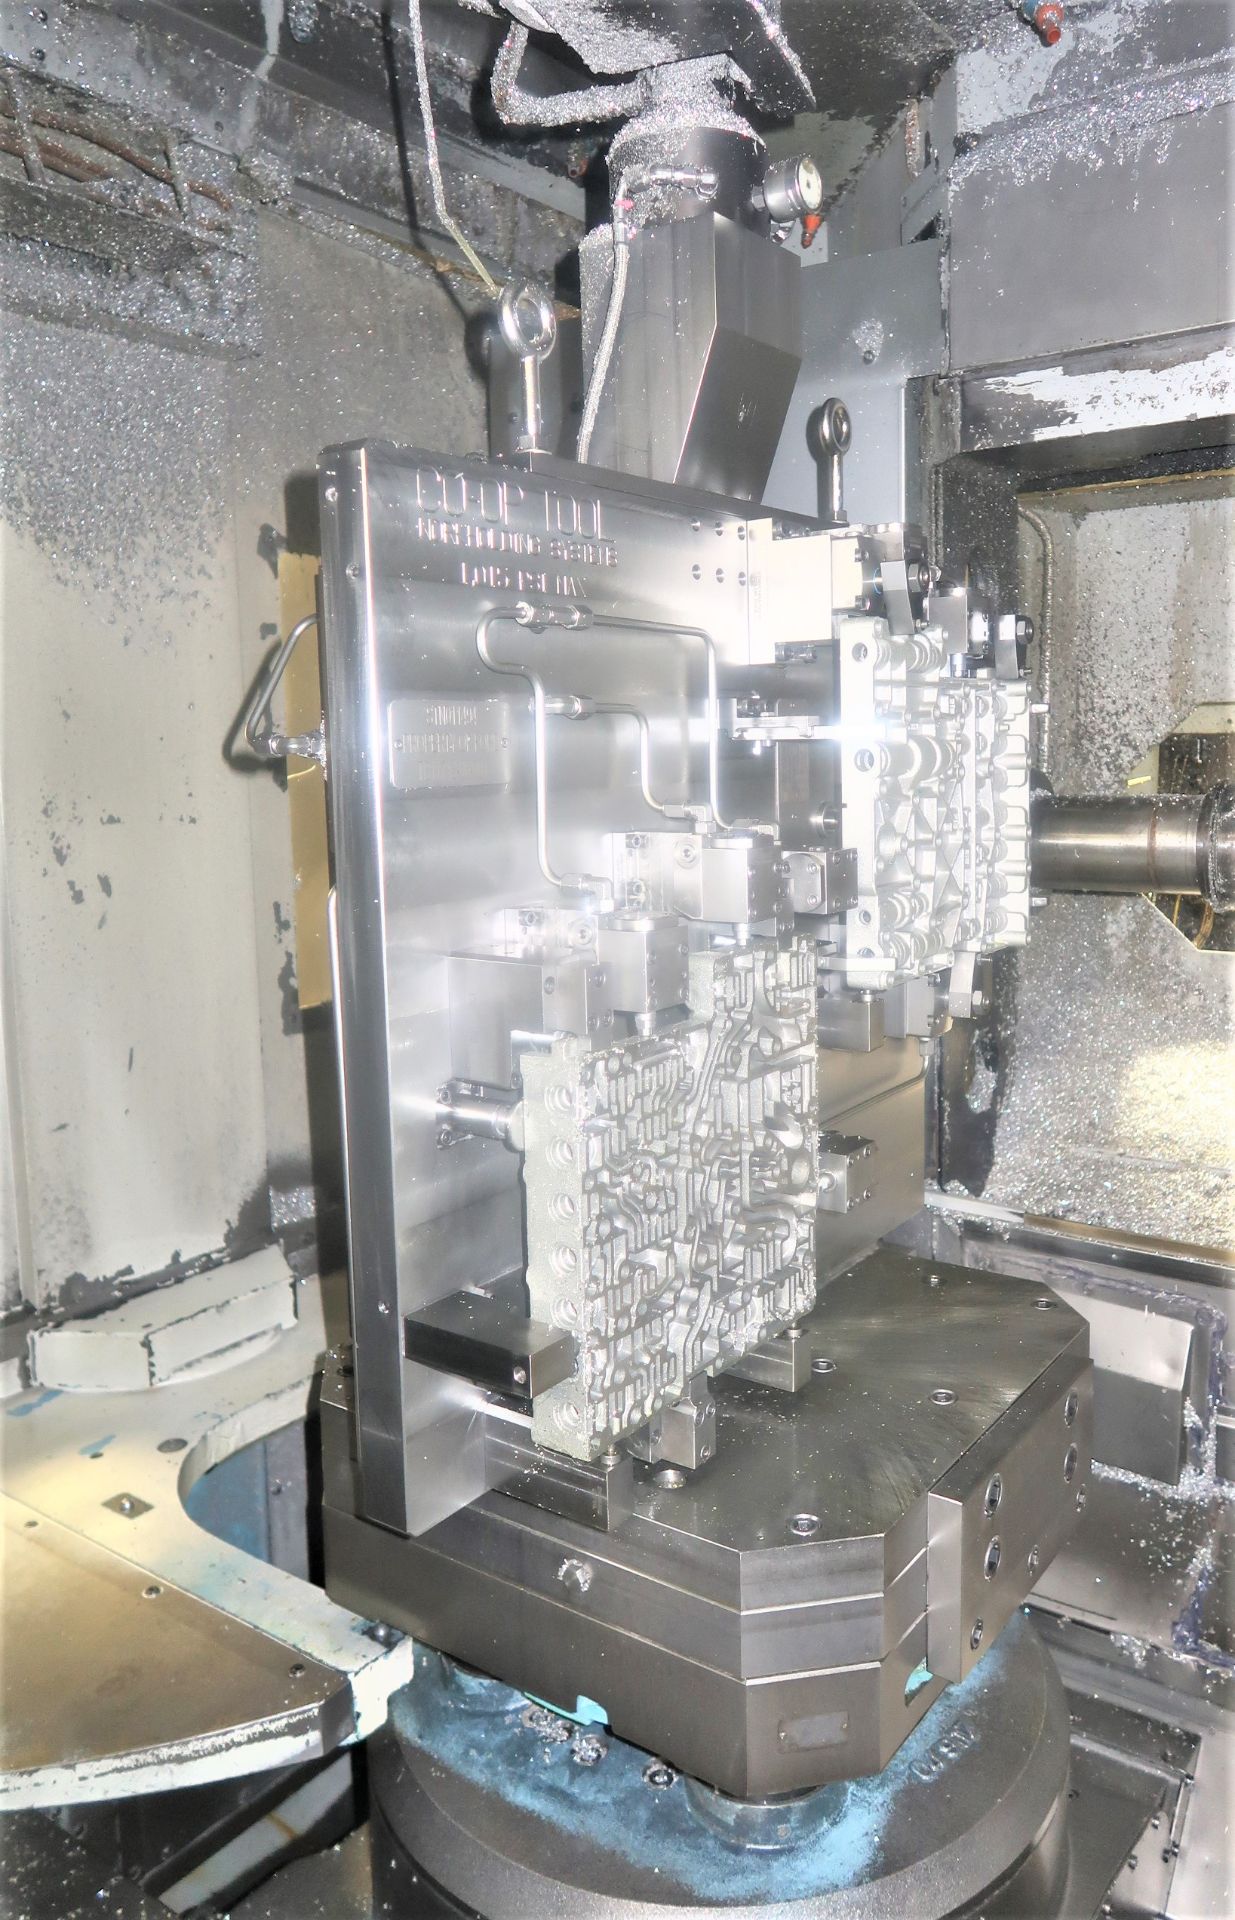 20"x20" Pallet Makino A71 CNC 4-Axis Precision Horizontal Machining Center, New 2004 - Image 3 of 9